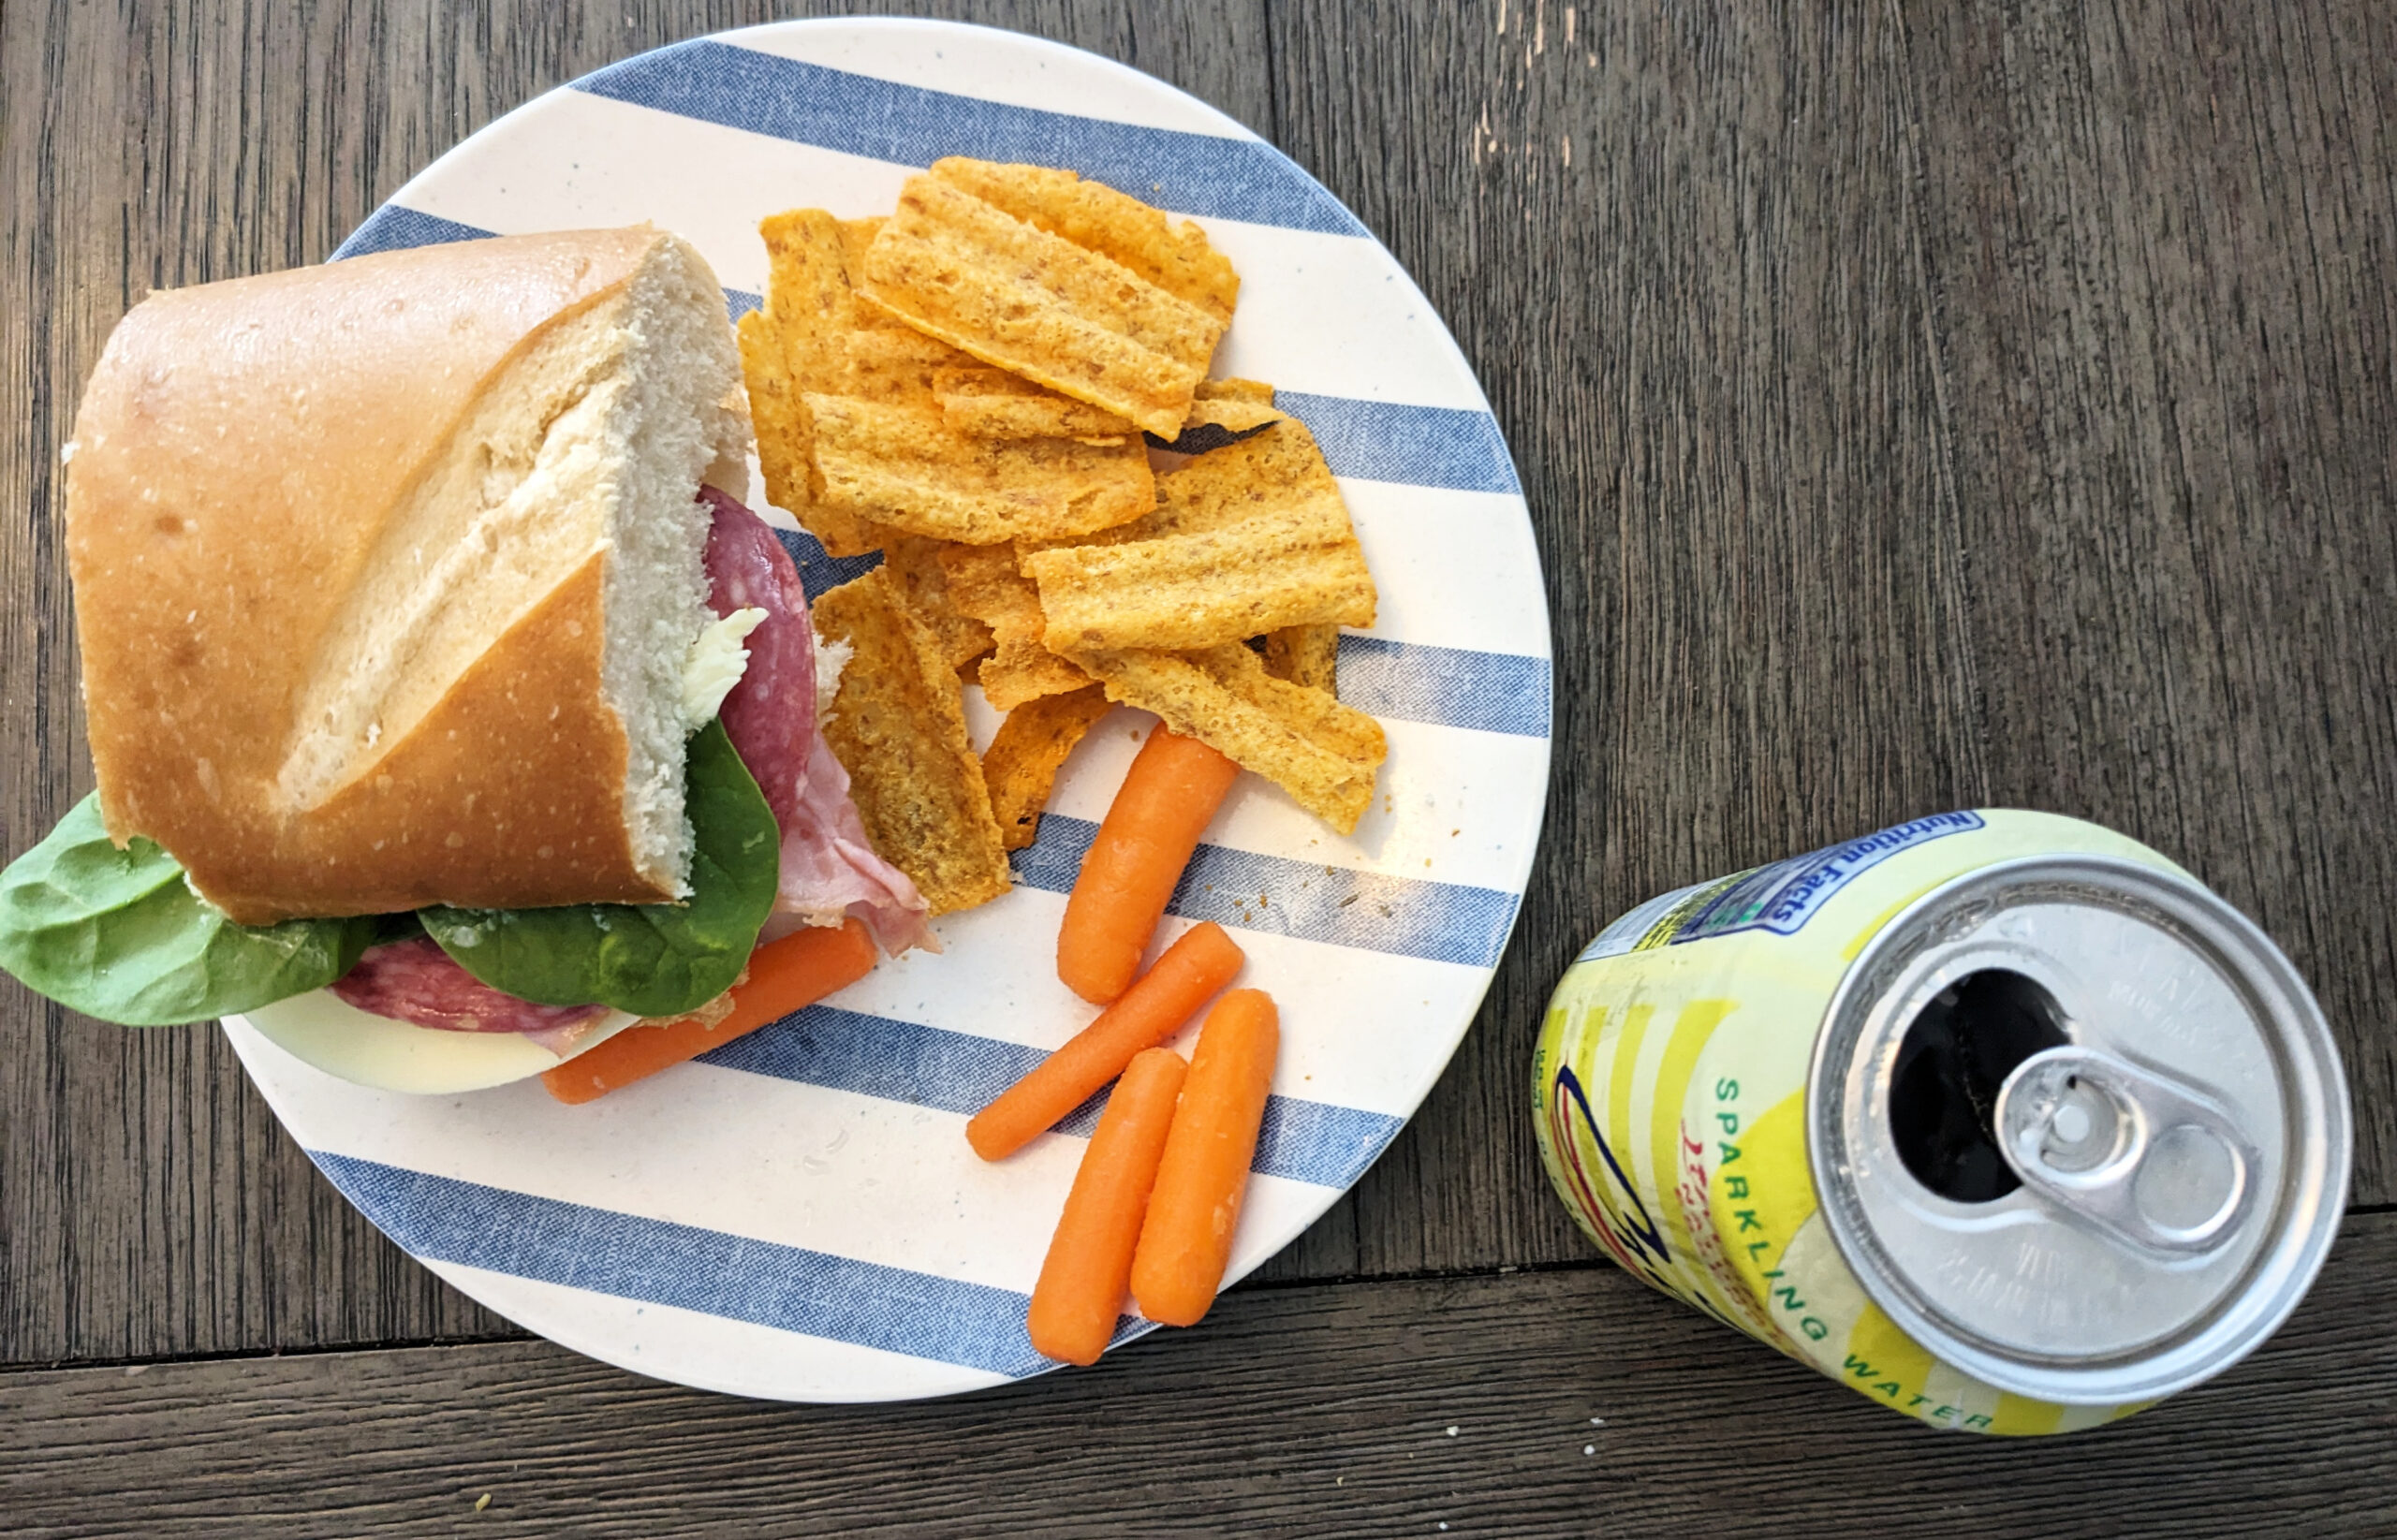 Lunch sandwich with carrots, corn chips and sparkling water